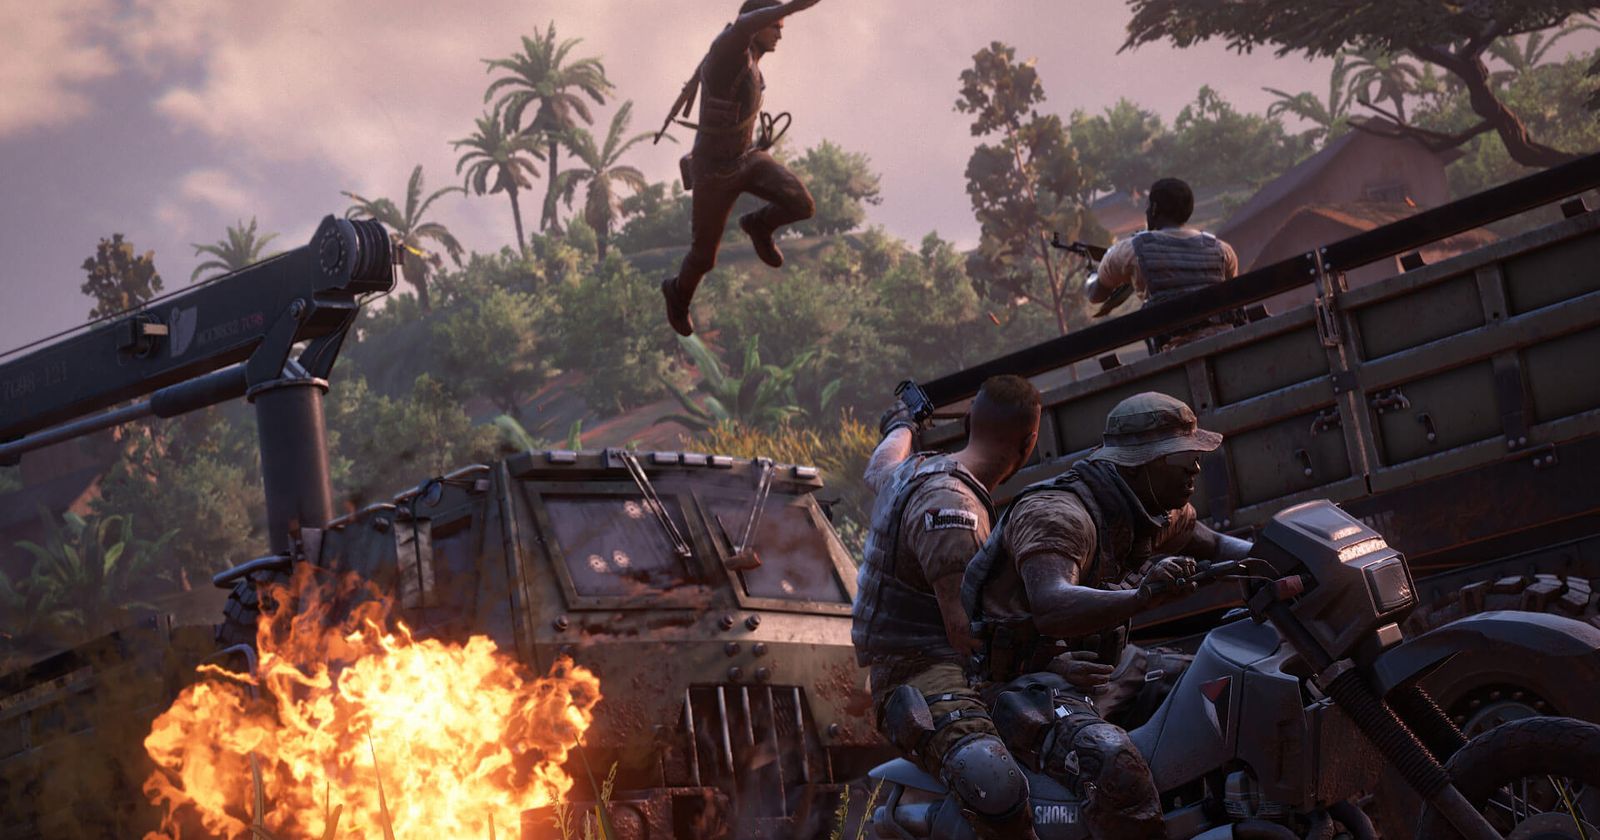 Sony lists PC version of Uncharted 4 in investor report